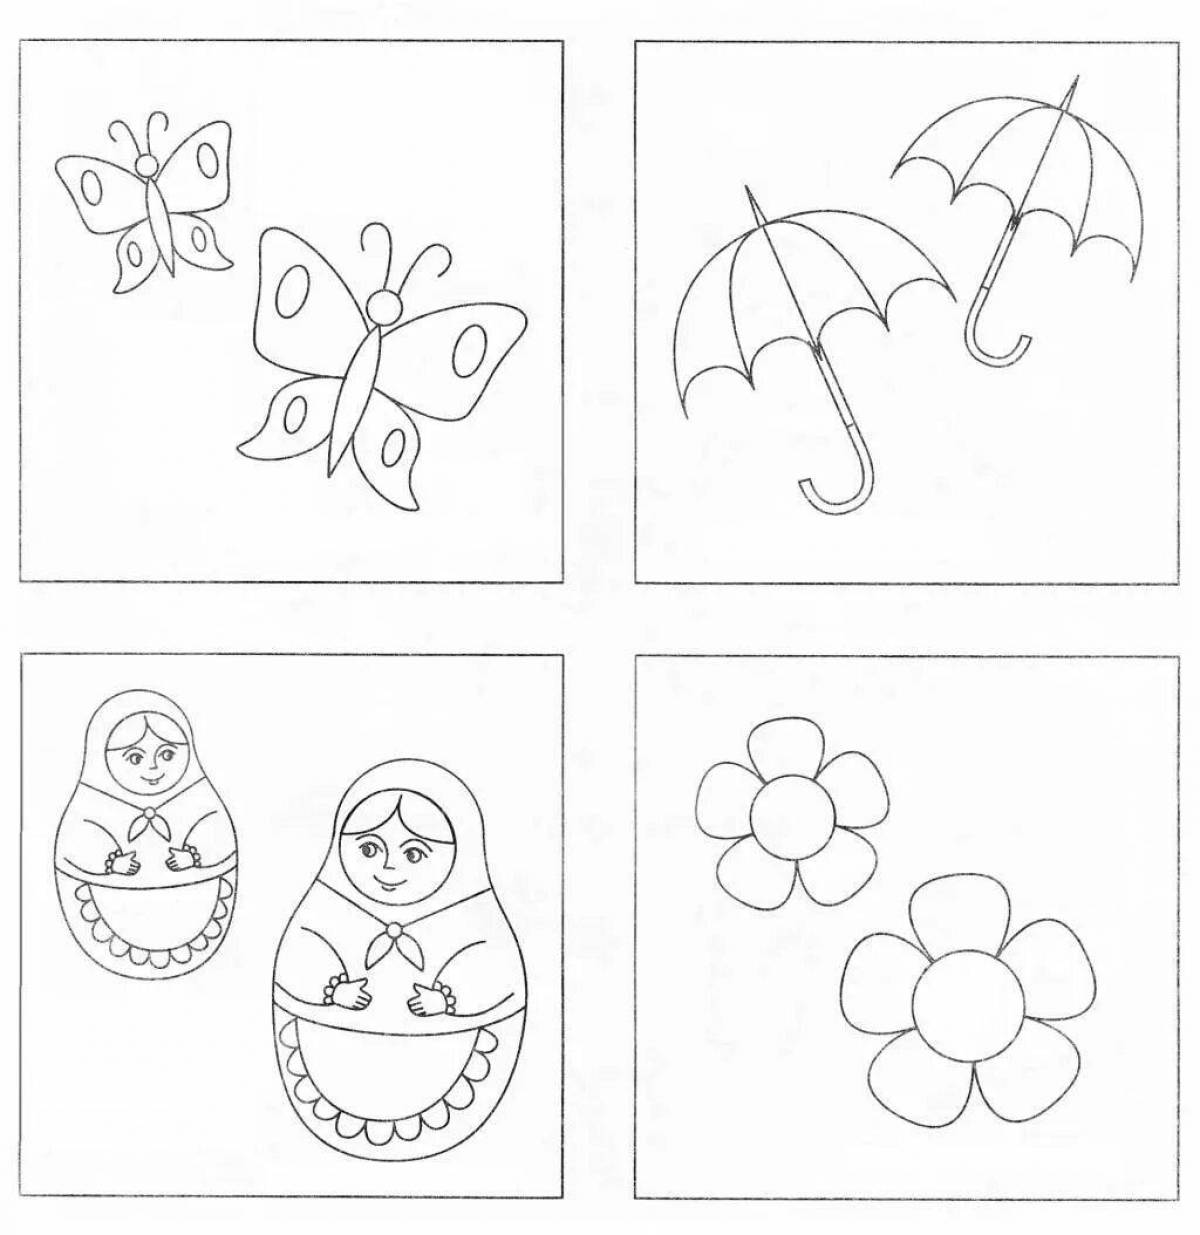 Fun coloring book for kids from one lot